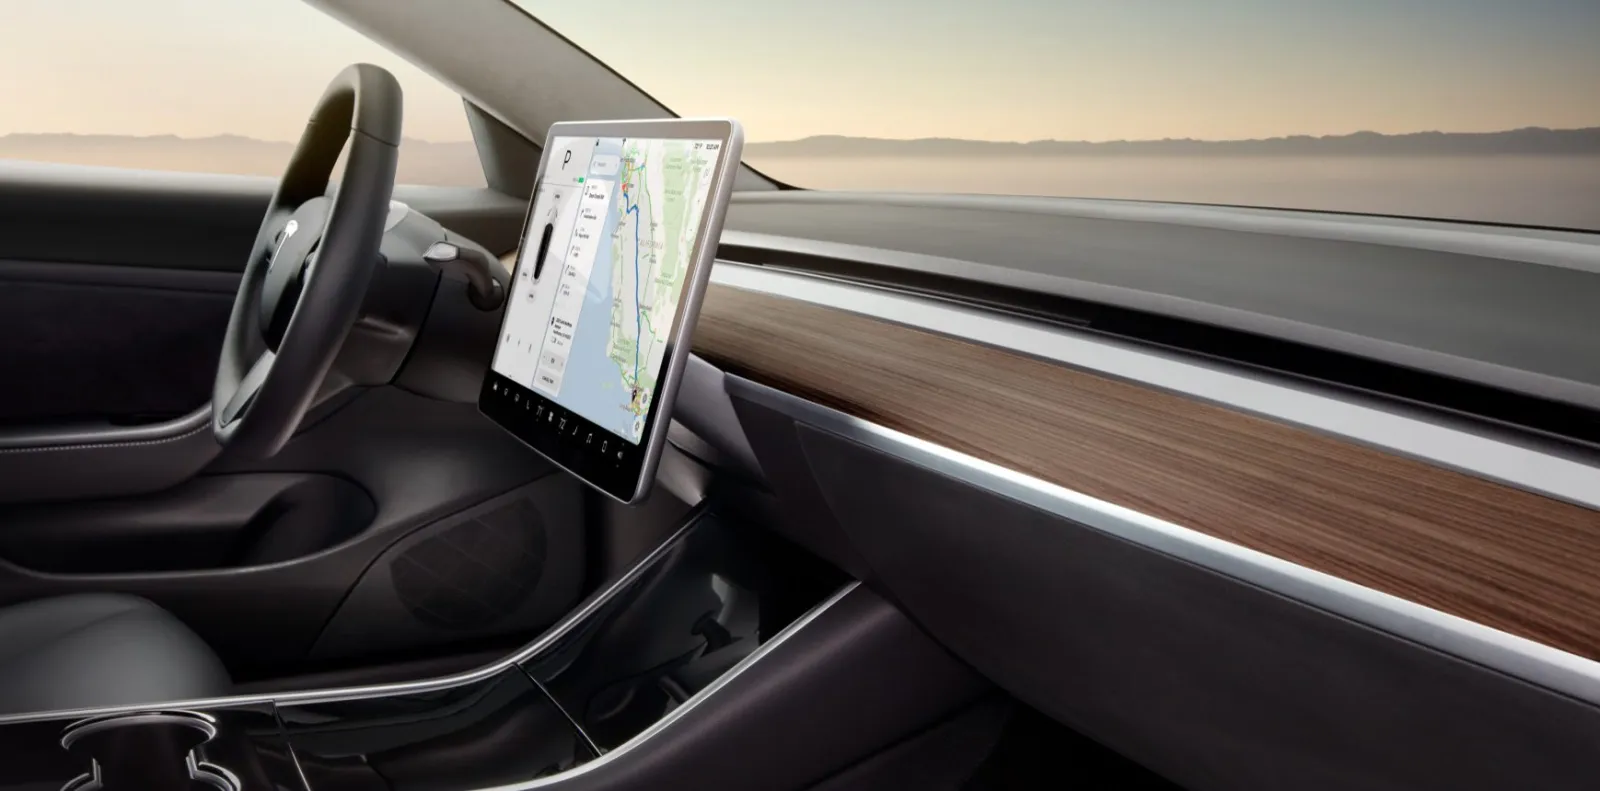 How Does The Air Conditioning Work In A Tesla